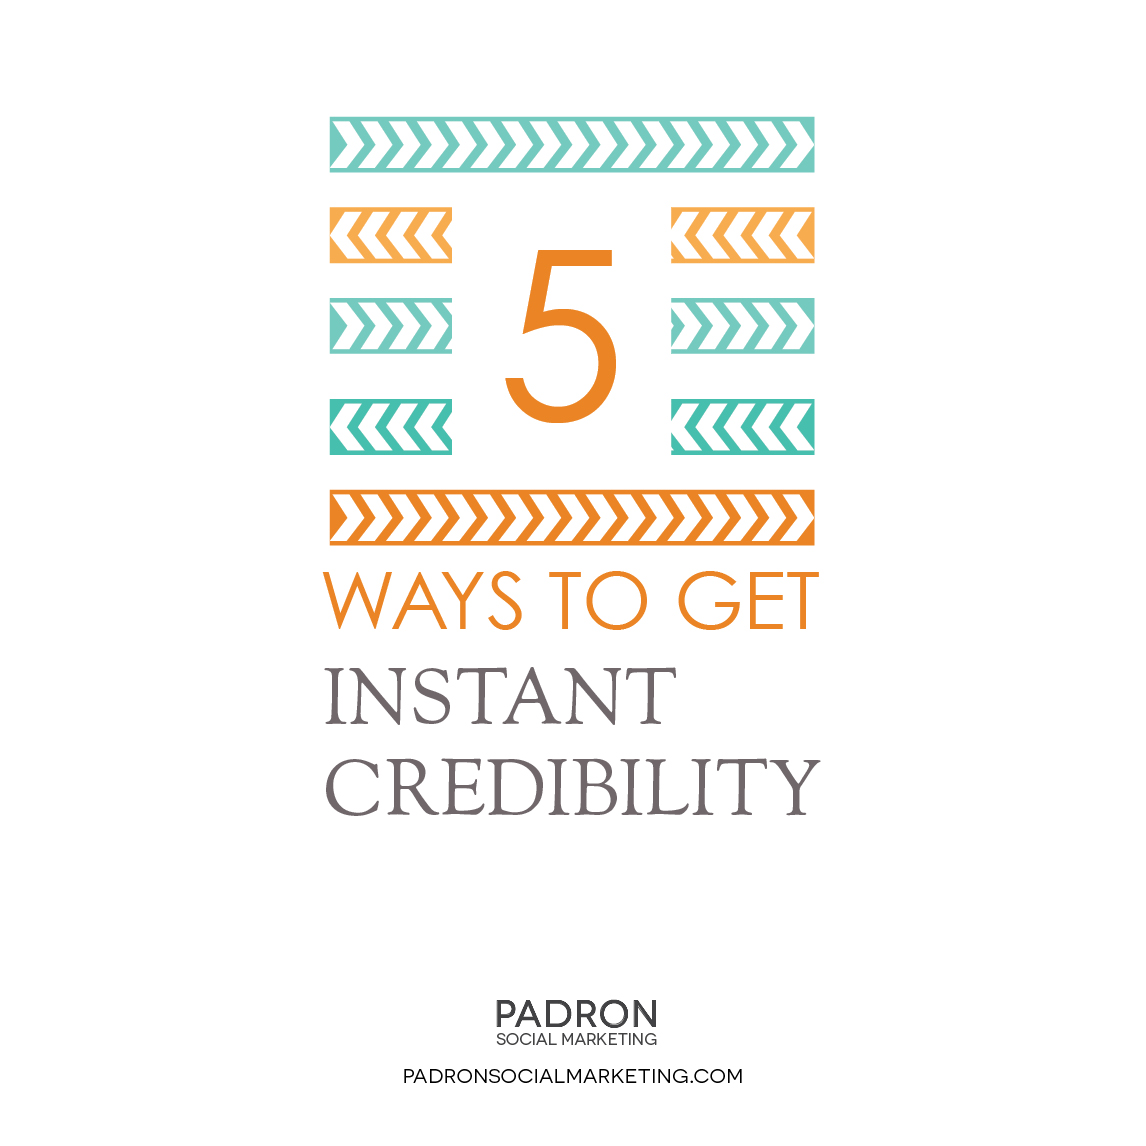 5 Ways to Get Instant Credibility